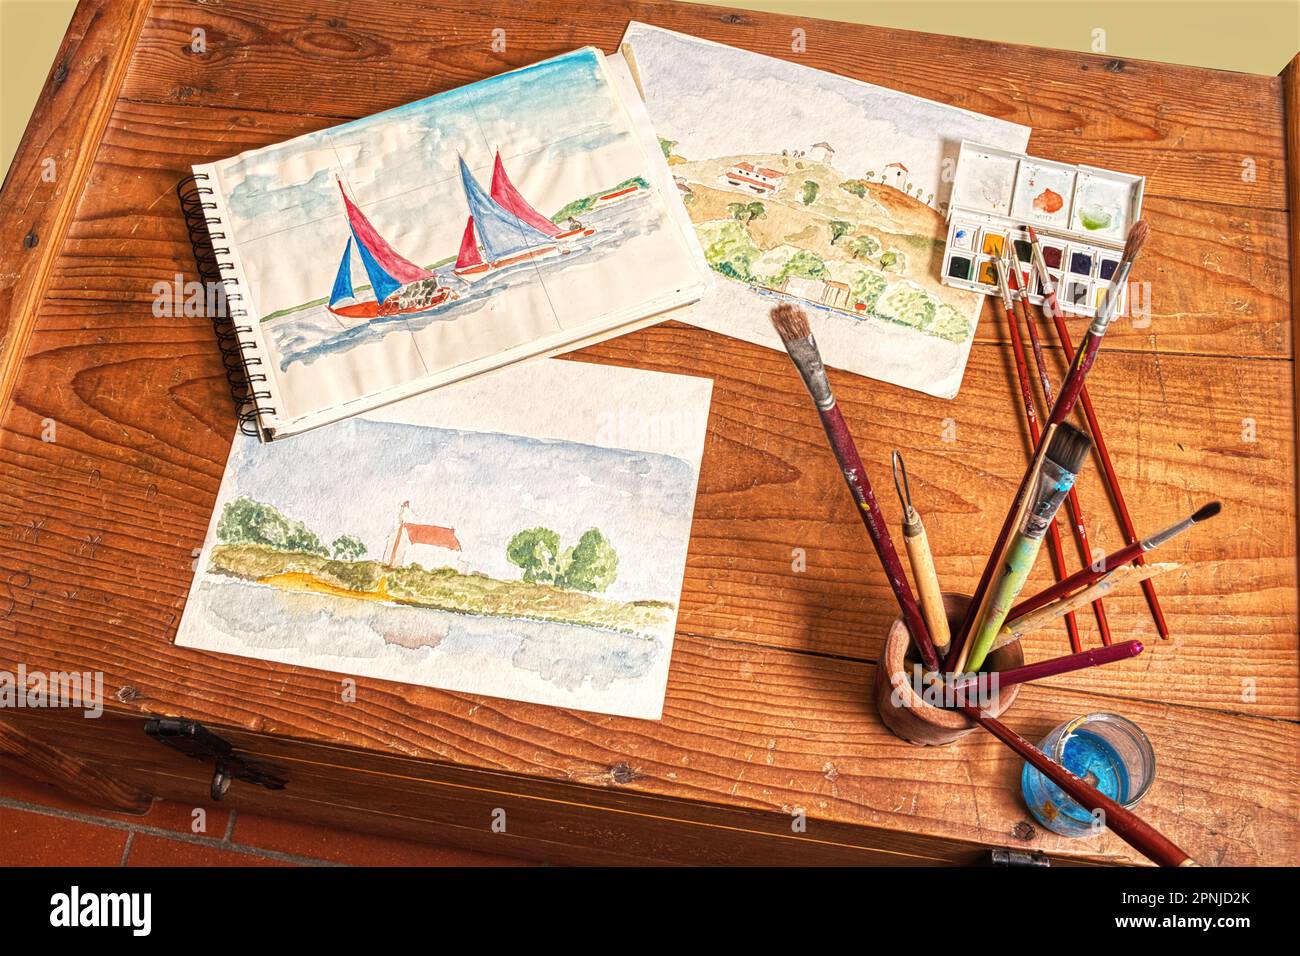 Watercolor painting, a light and immediate way to record your travel impressions. Some artwork and tools on a rustic wooden chest of drawers. Stock Photo